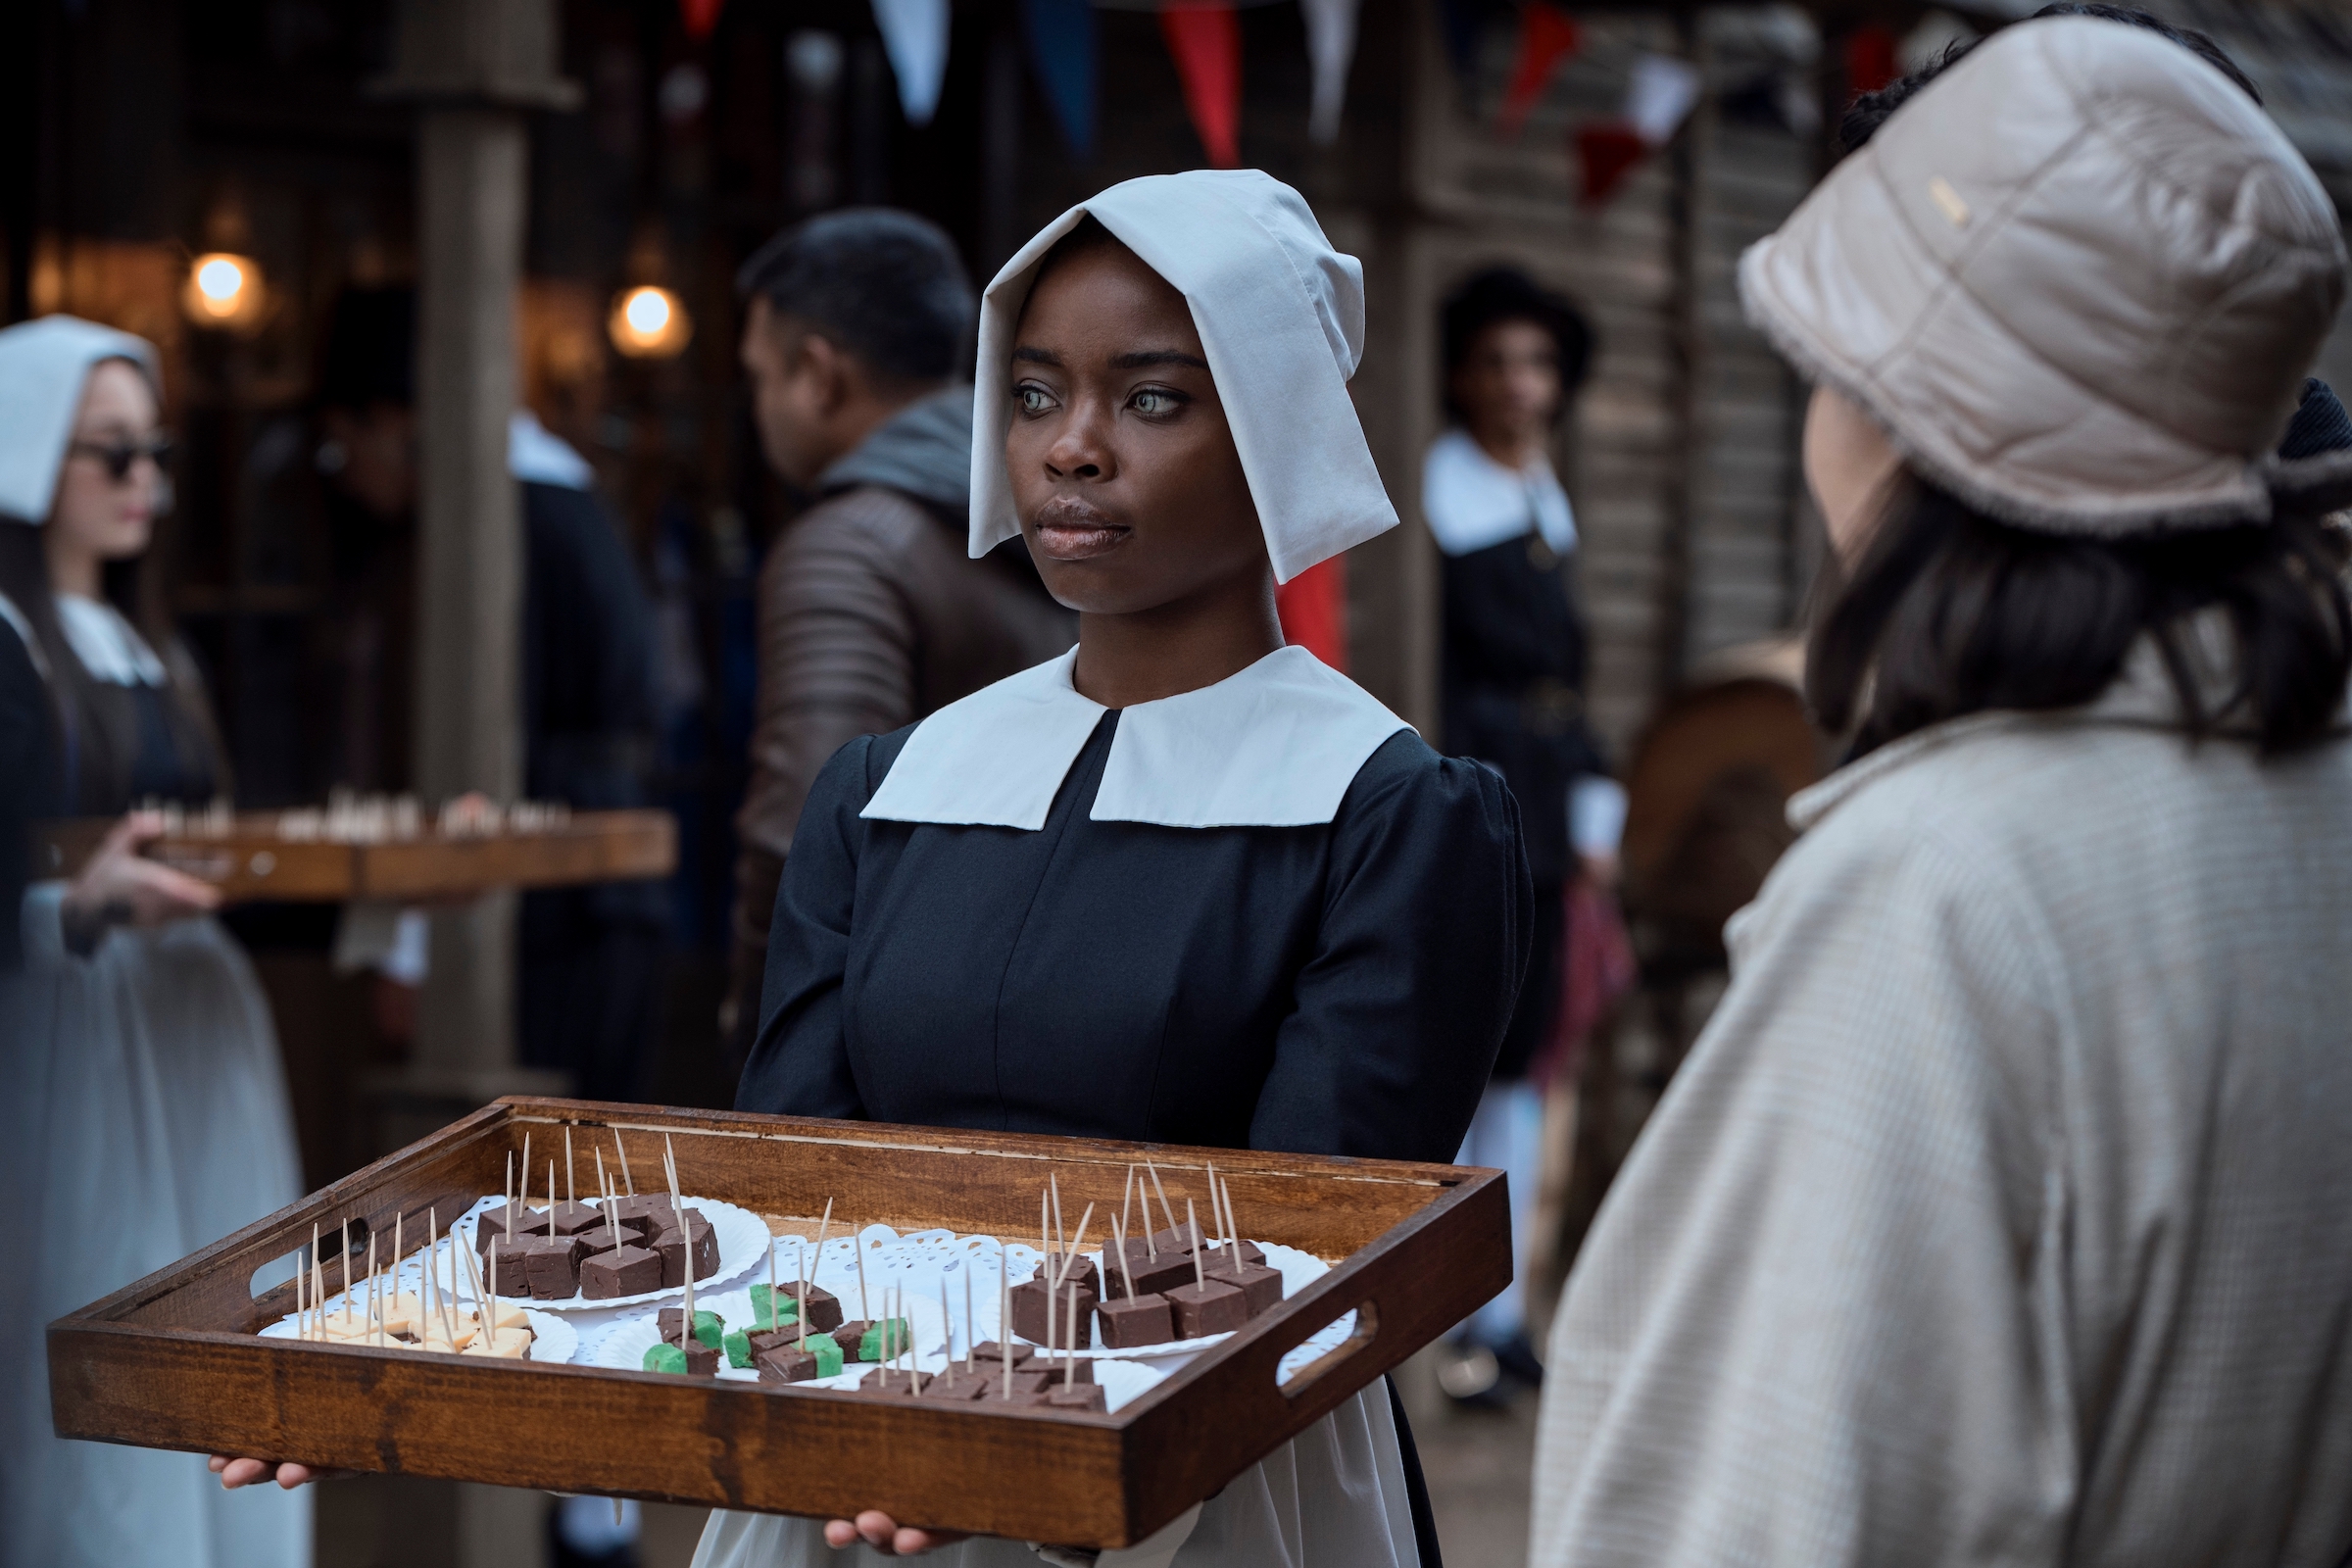 Bianca Barclay (Joy Sunday), a siren student at Nevermore, offers free fudge samples at Pilgrim World as part of Outreach Day.  (Vlad Cioplea - Netflix)